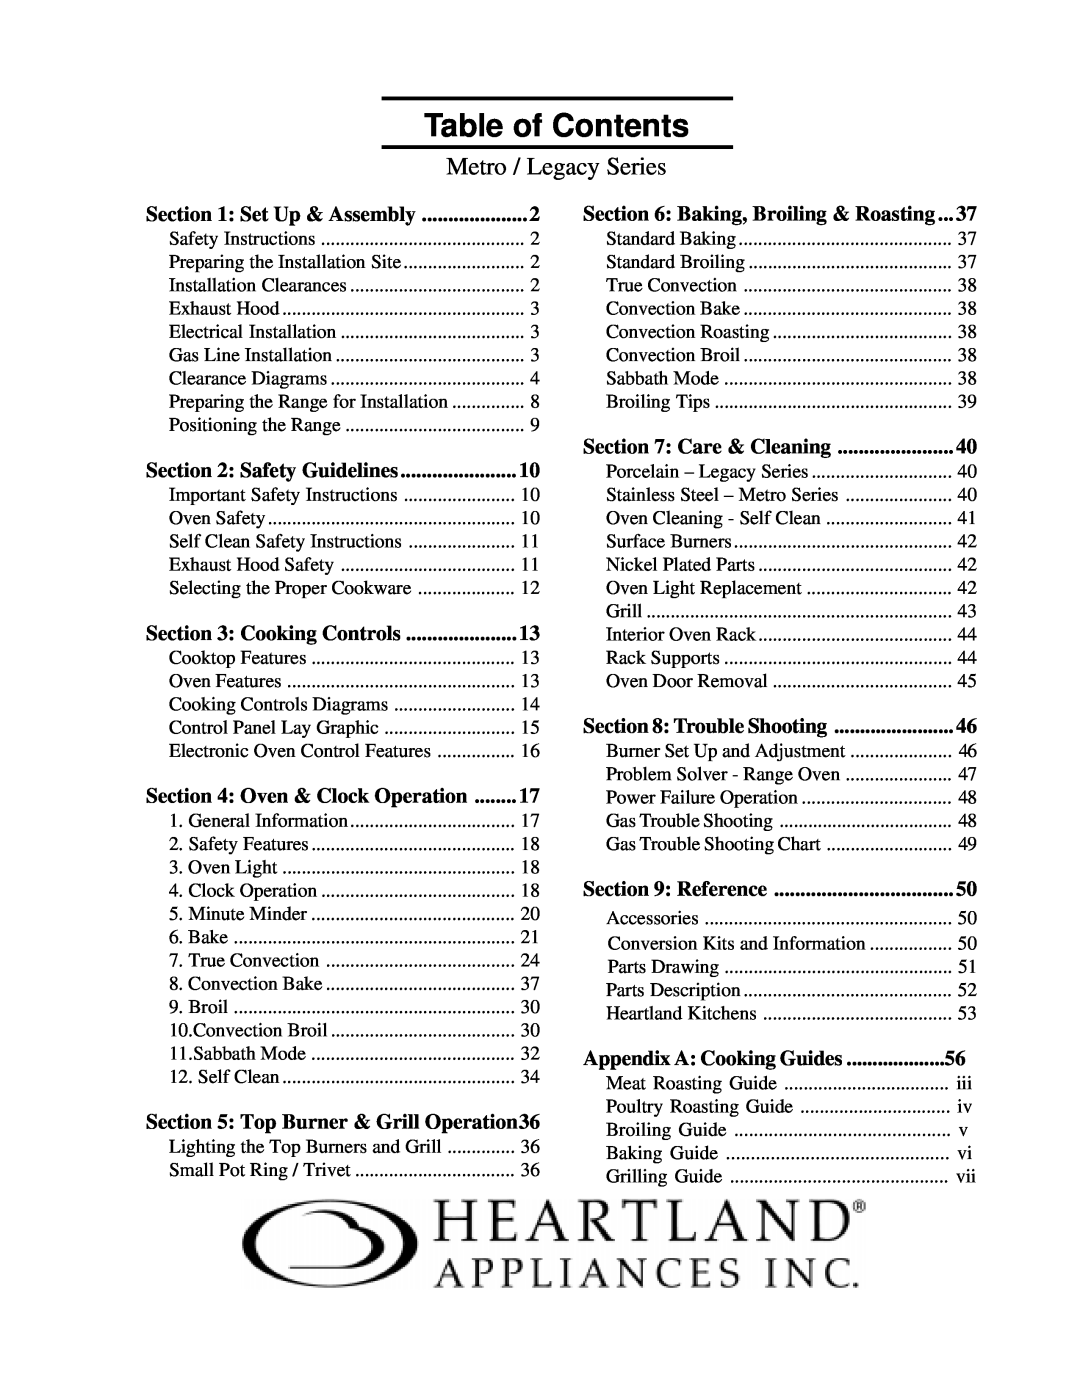 Heartland 3630 Table of Contents, Set Up & Assembly, Baking, Broiling & Roasting, Safety Guidelines, Cooking Controls 